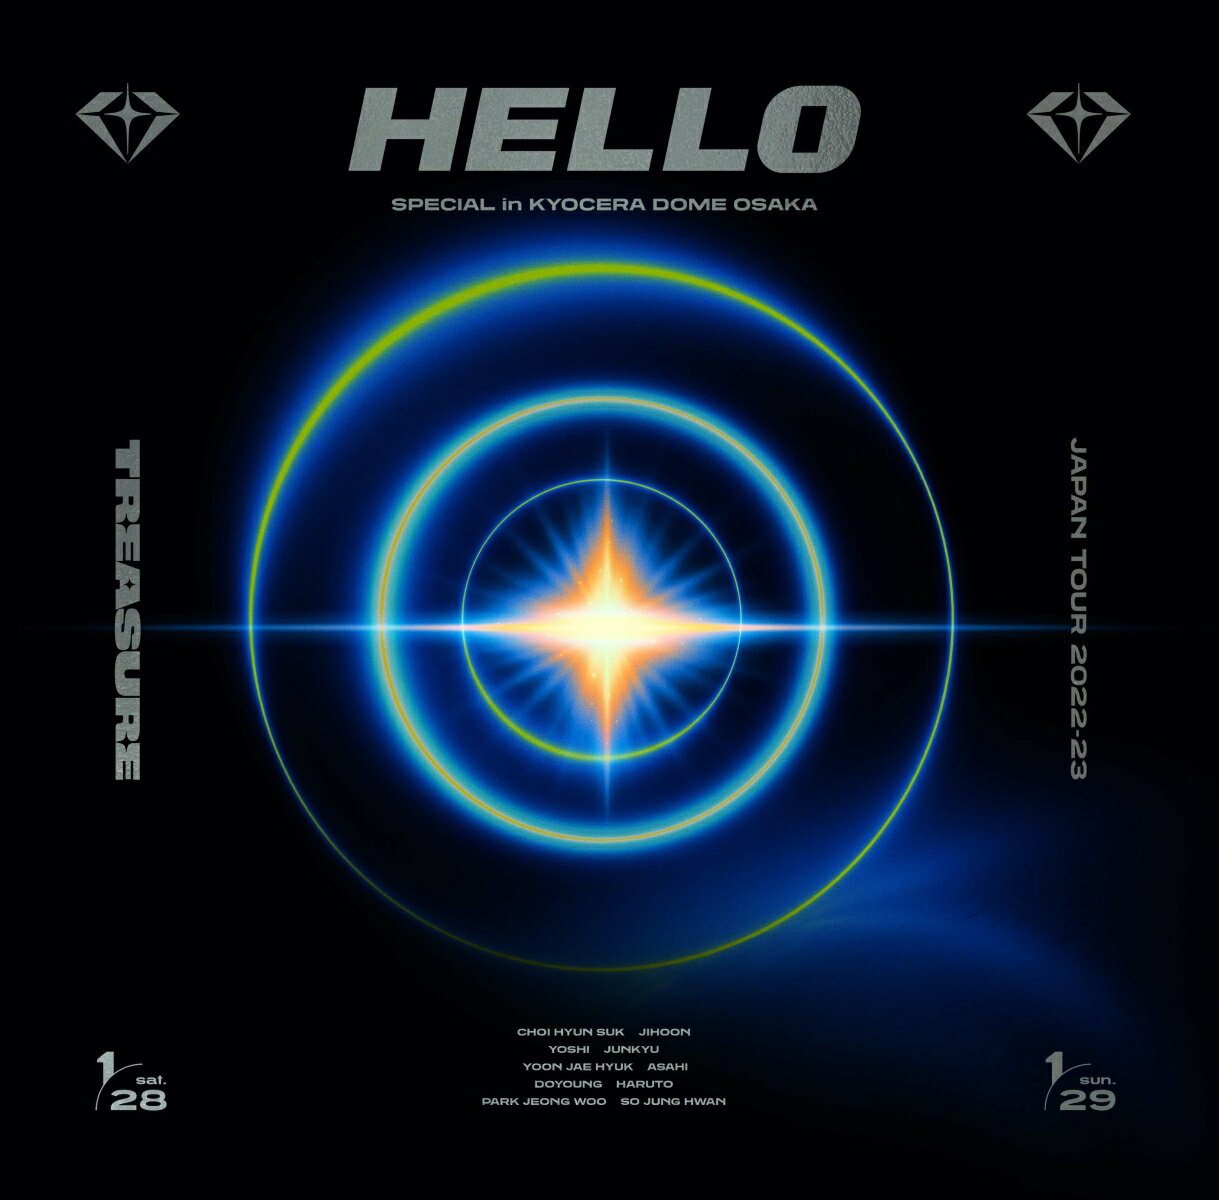 TREASURE JAPAN TOUR 2022-23 〜HELLO〜 SPECIAL in KYOCERA DOME OSAKA(DVD3枚組スマプラ対応) 初回生産限定)